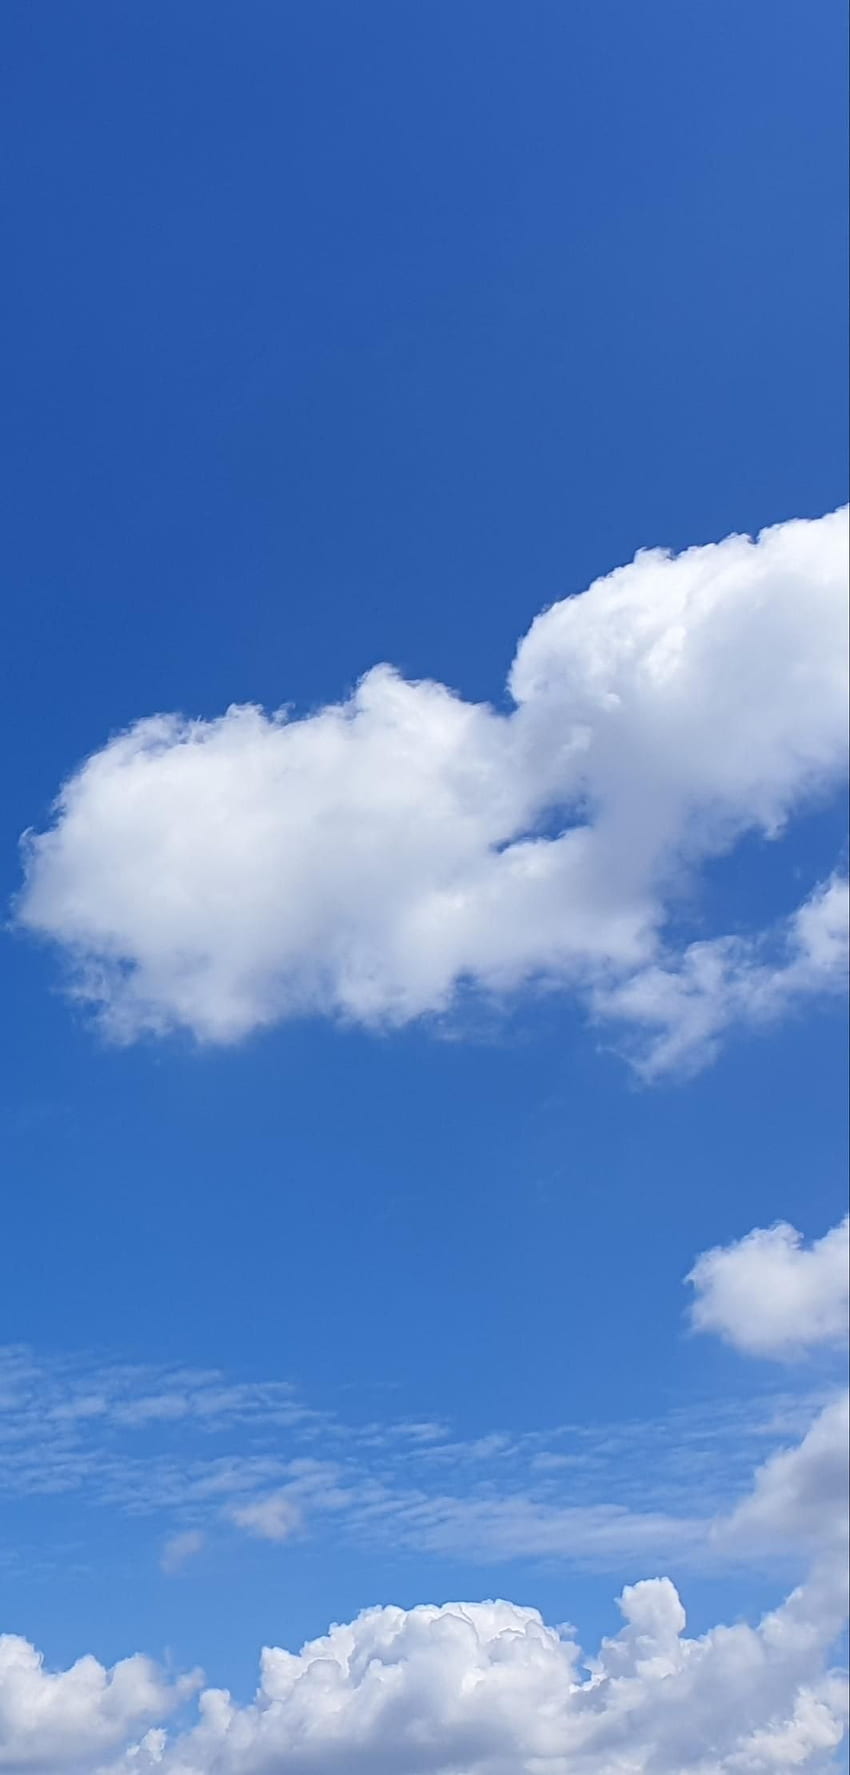 White Clouds On The Blue Sky Nature iPhone Wallpapers Free Download